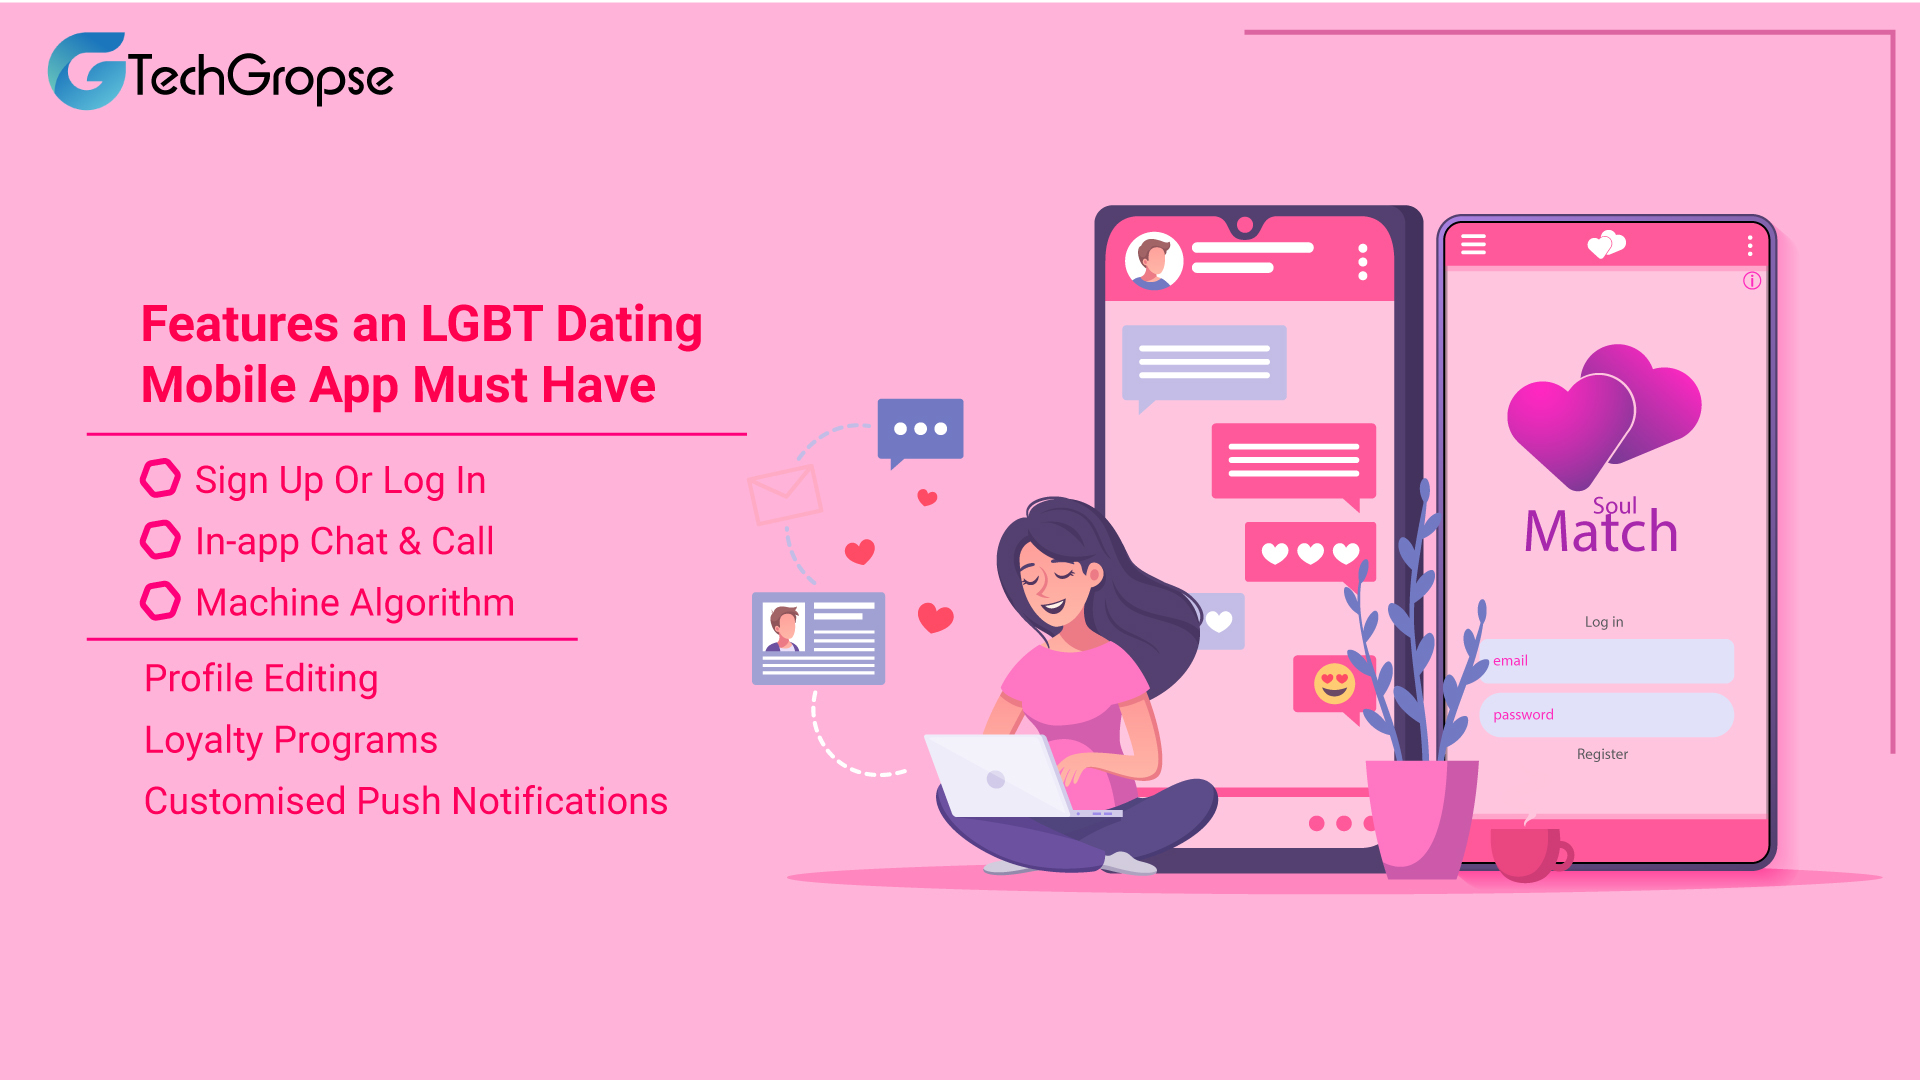 Essential Features an LGBT Dating Mobile App Must Have